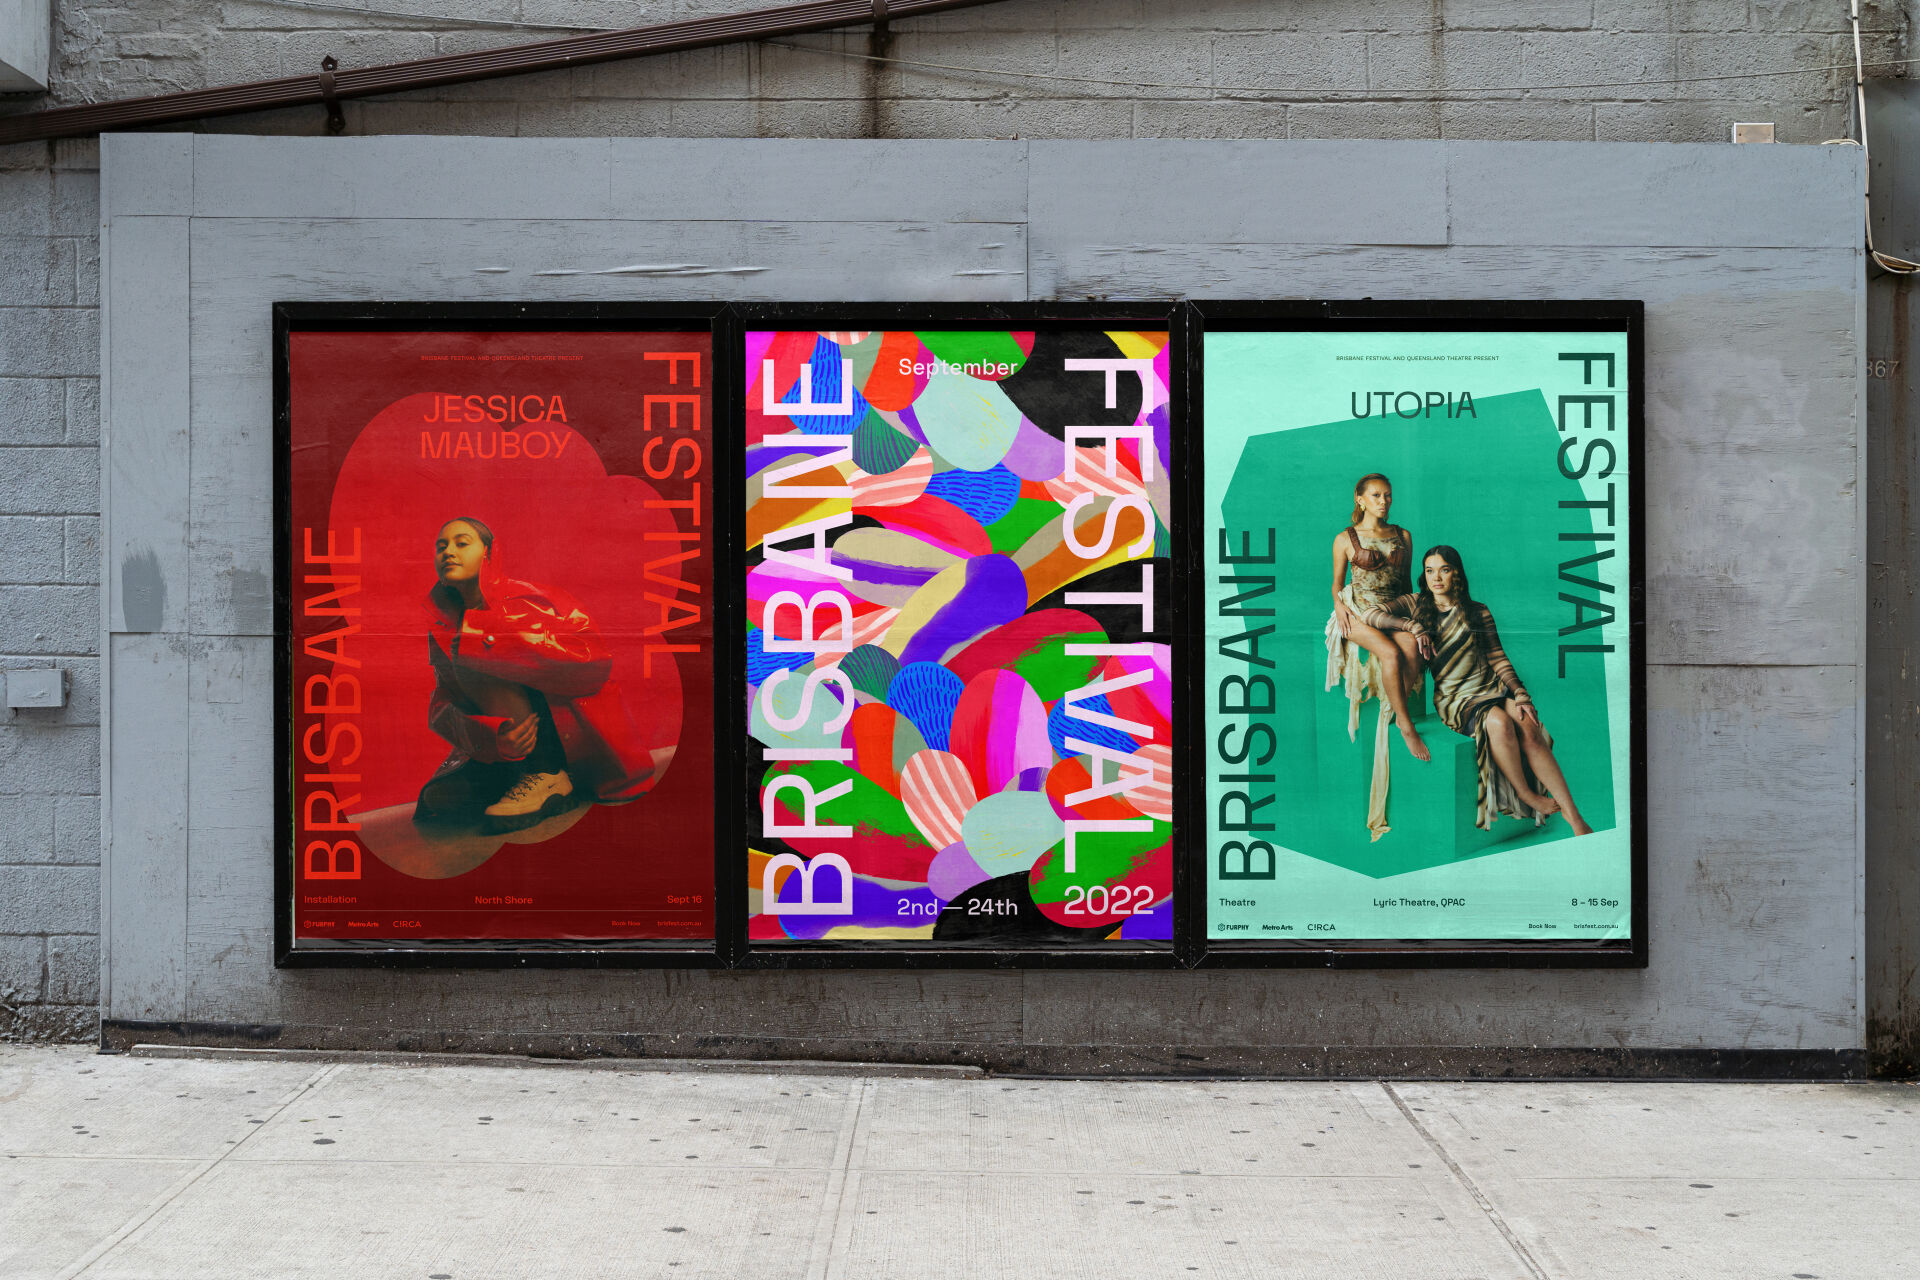 Examples of show posters designed as part of the Brisbane Festival rebrand